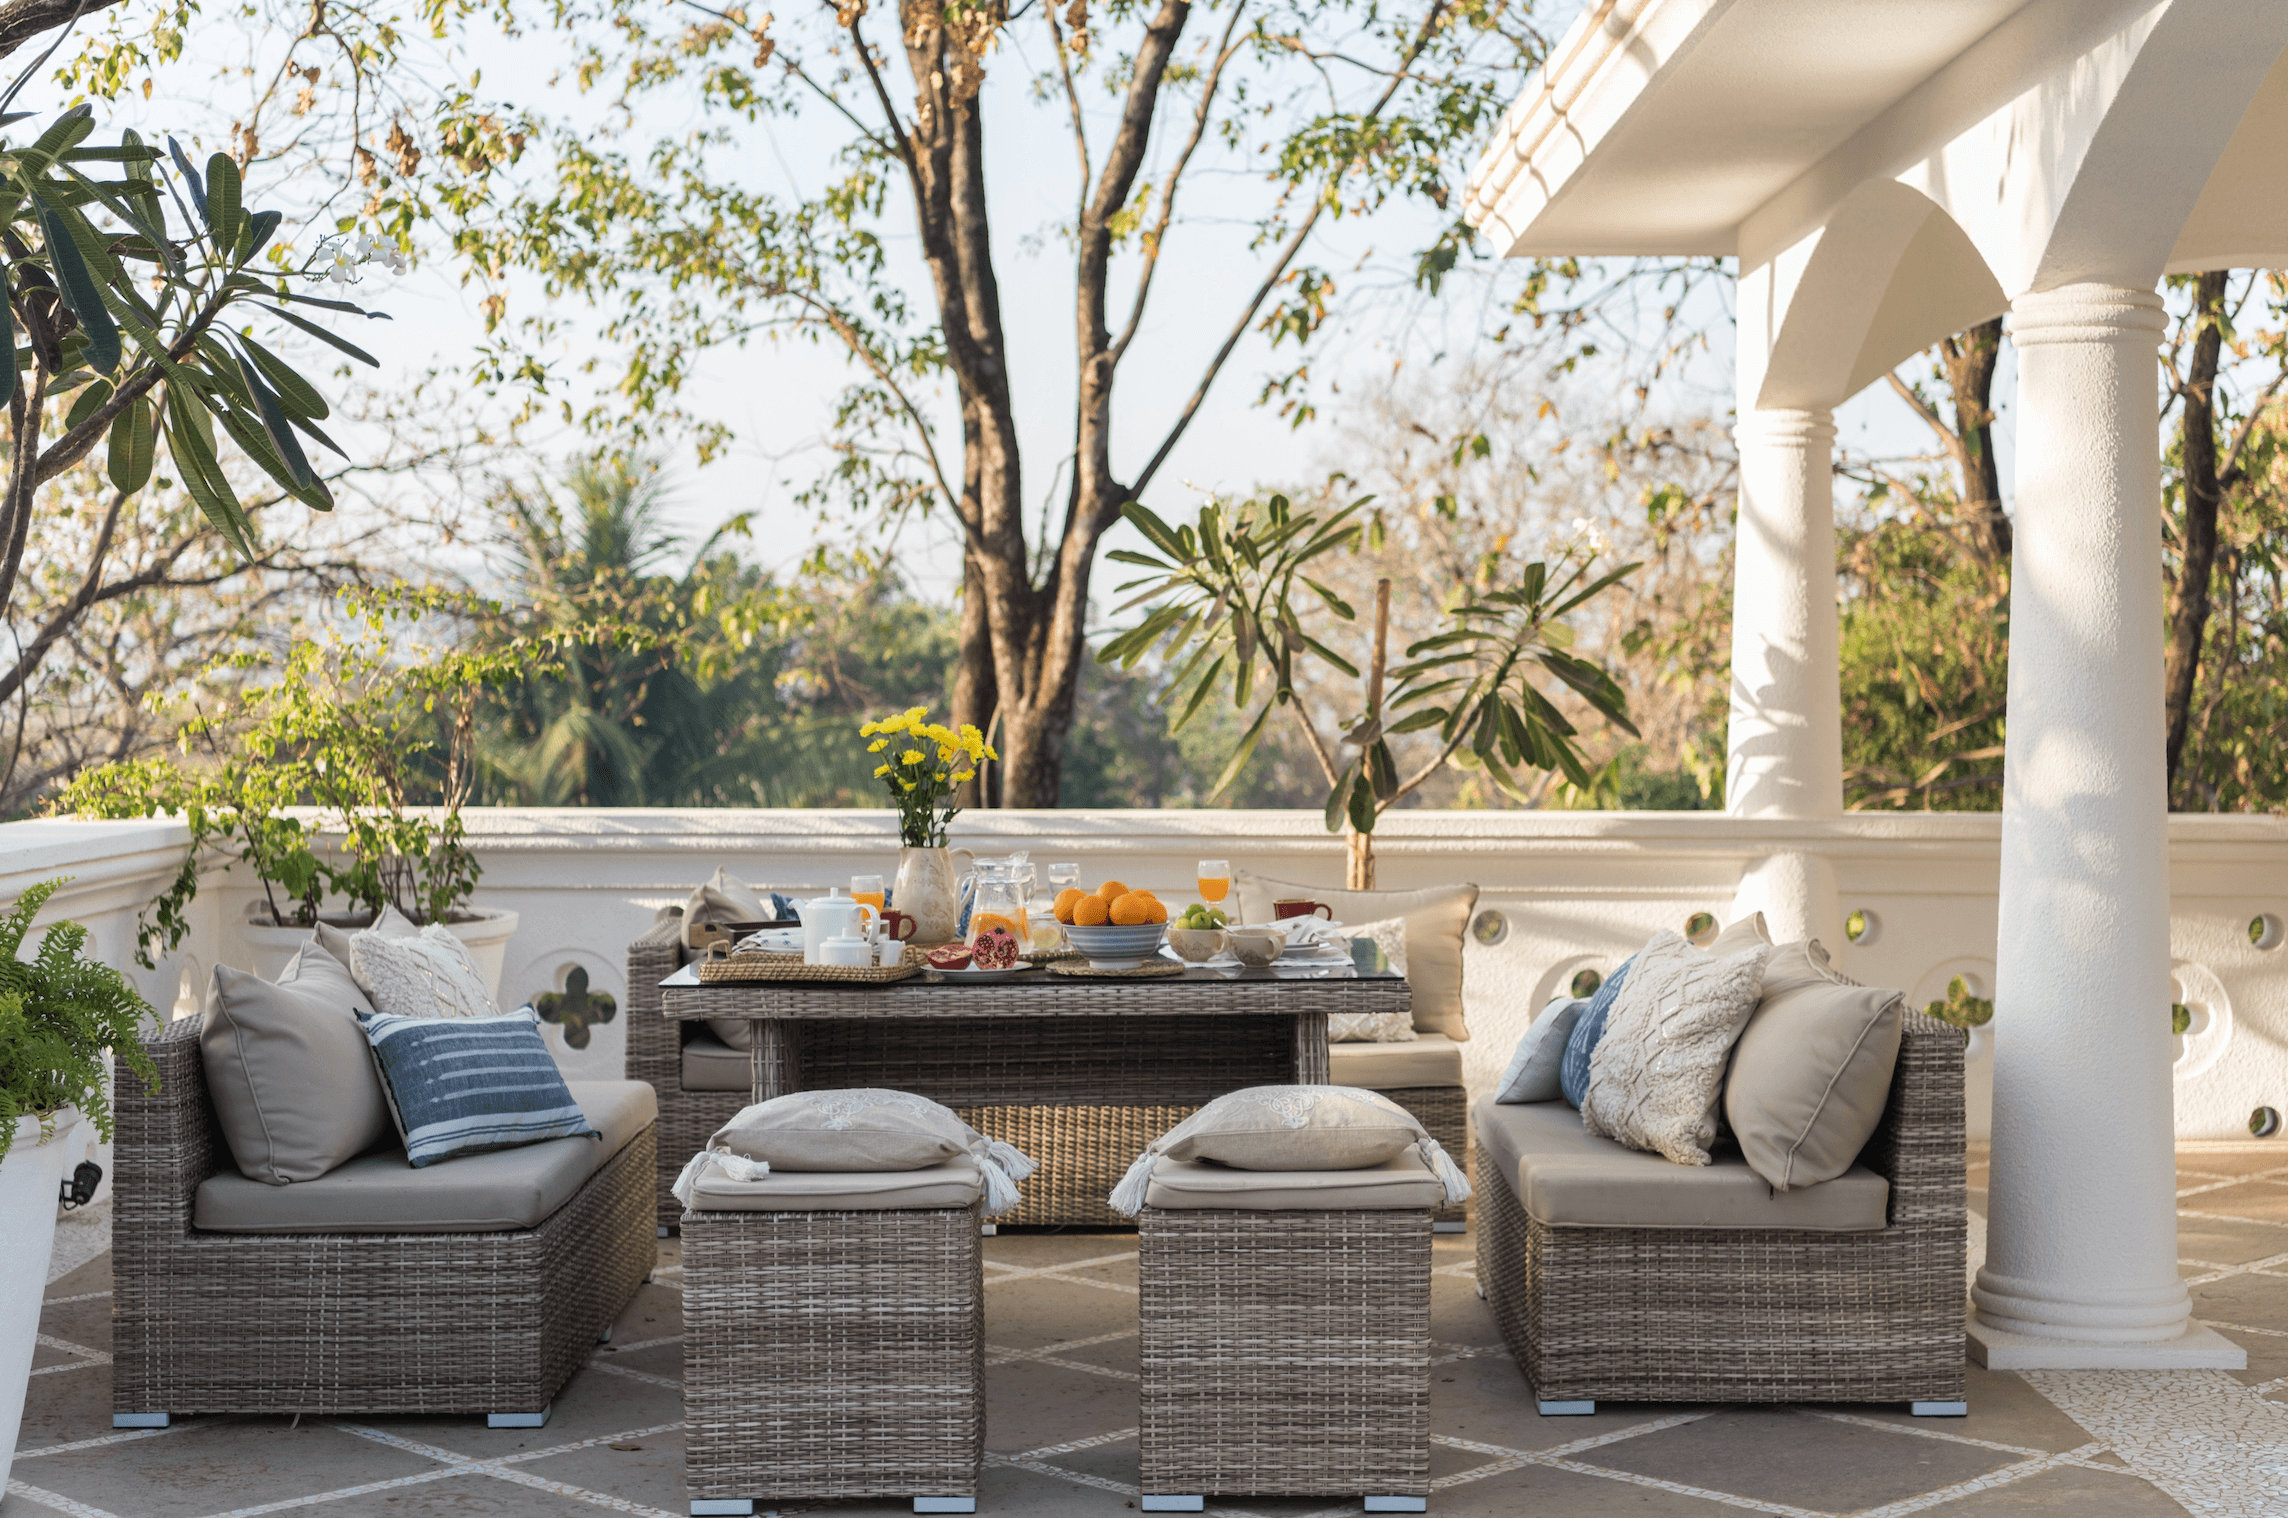 Outdoor Furniture - Mademoiselle Home Decor & Furniture Store